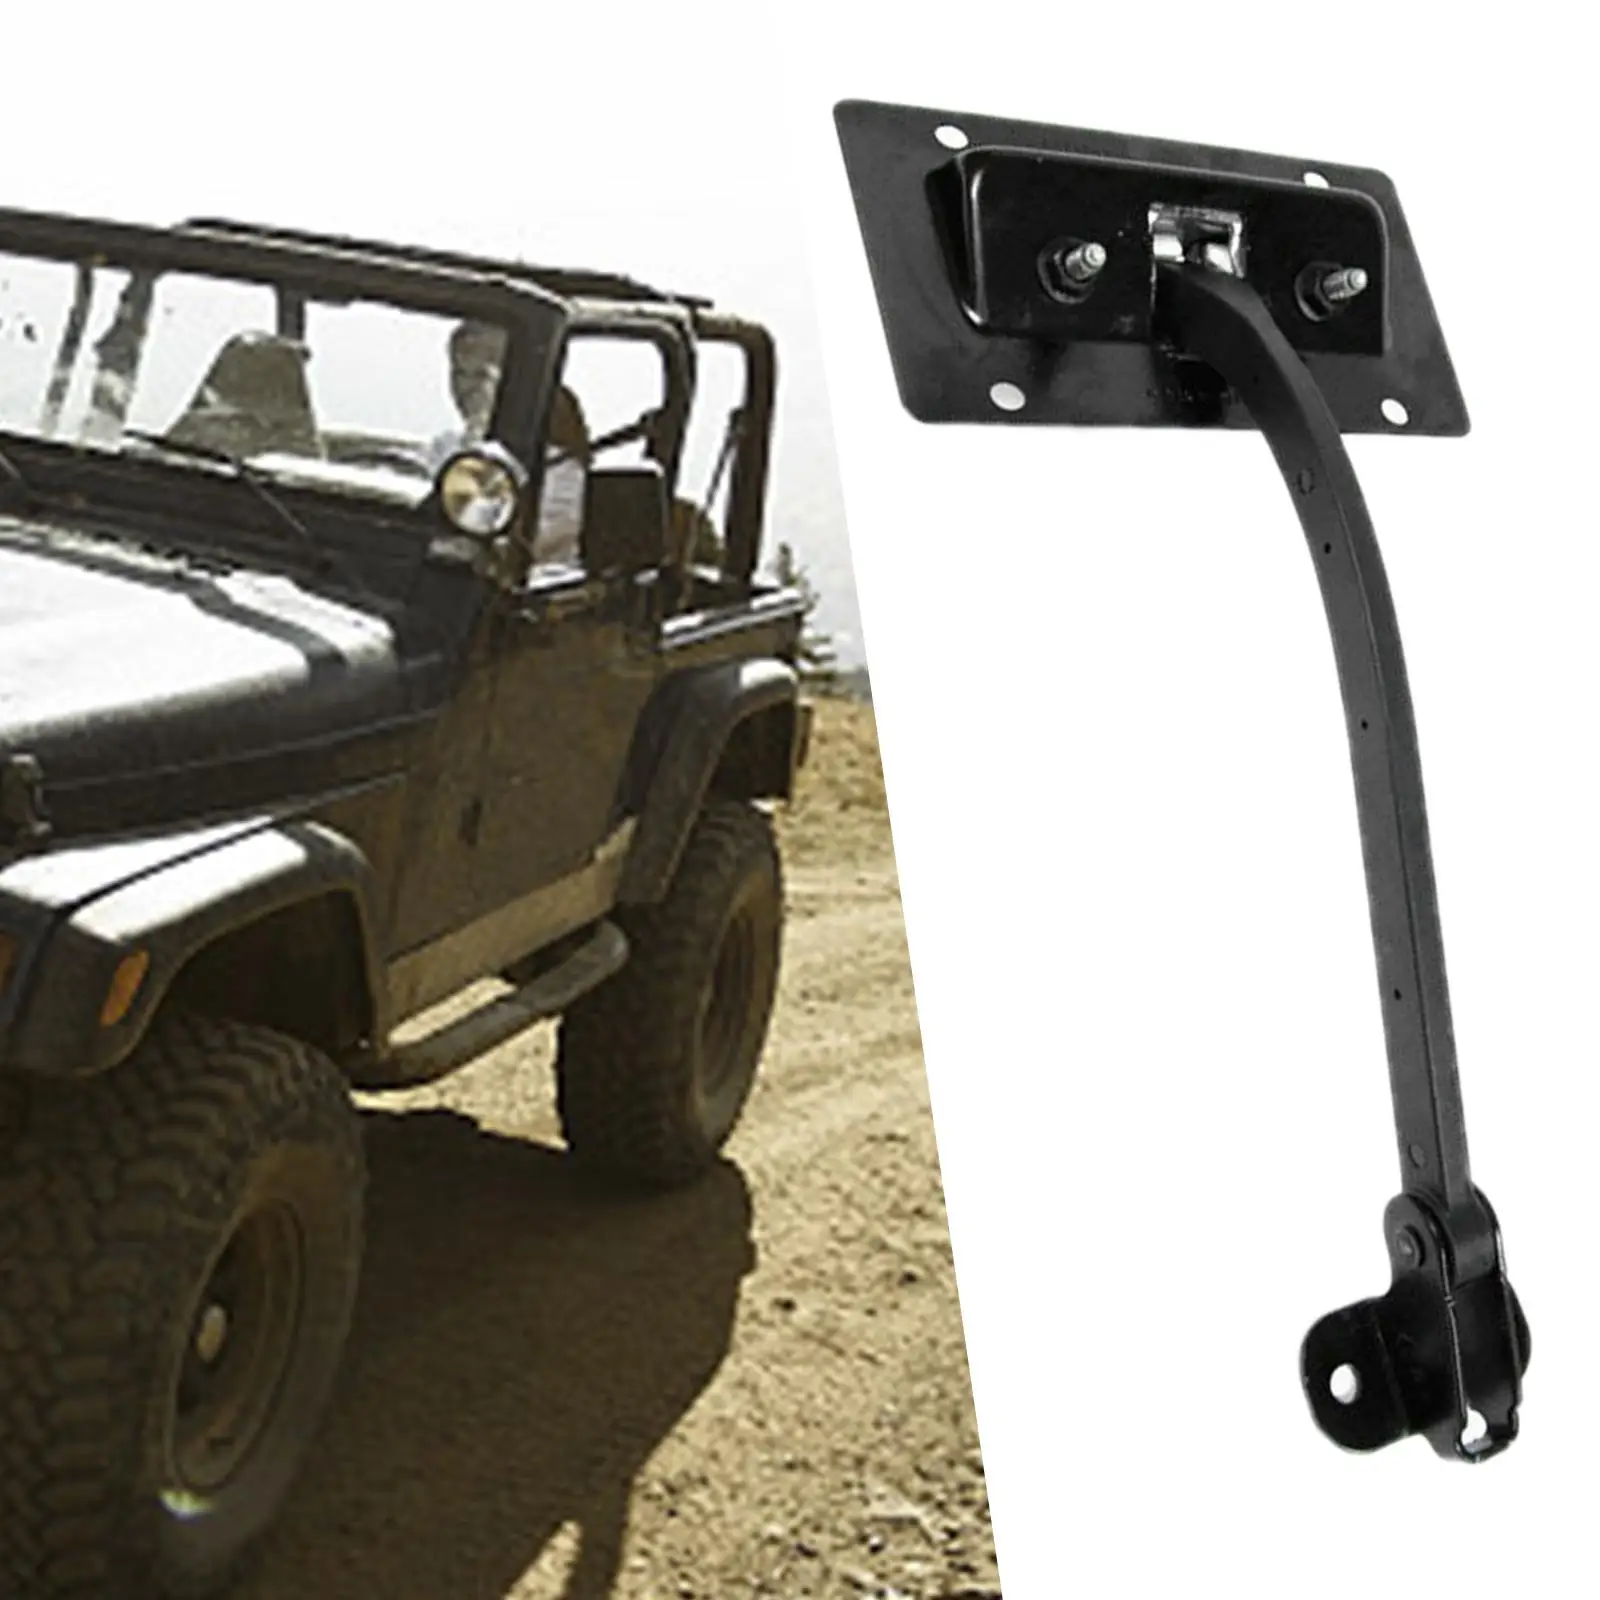 Retaining Strap 4589890AC Direct Replaces Easy to Install Auto Exterior Parts Tailgate Check for Jeep Wrangler JK 2011-2018